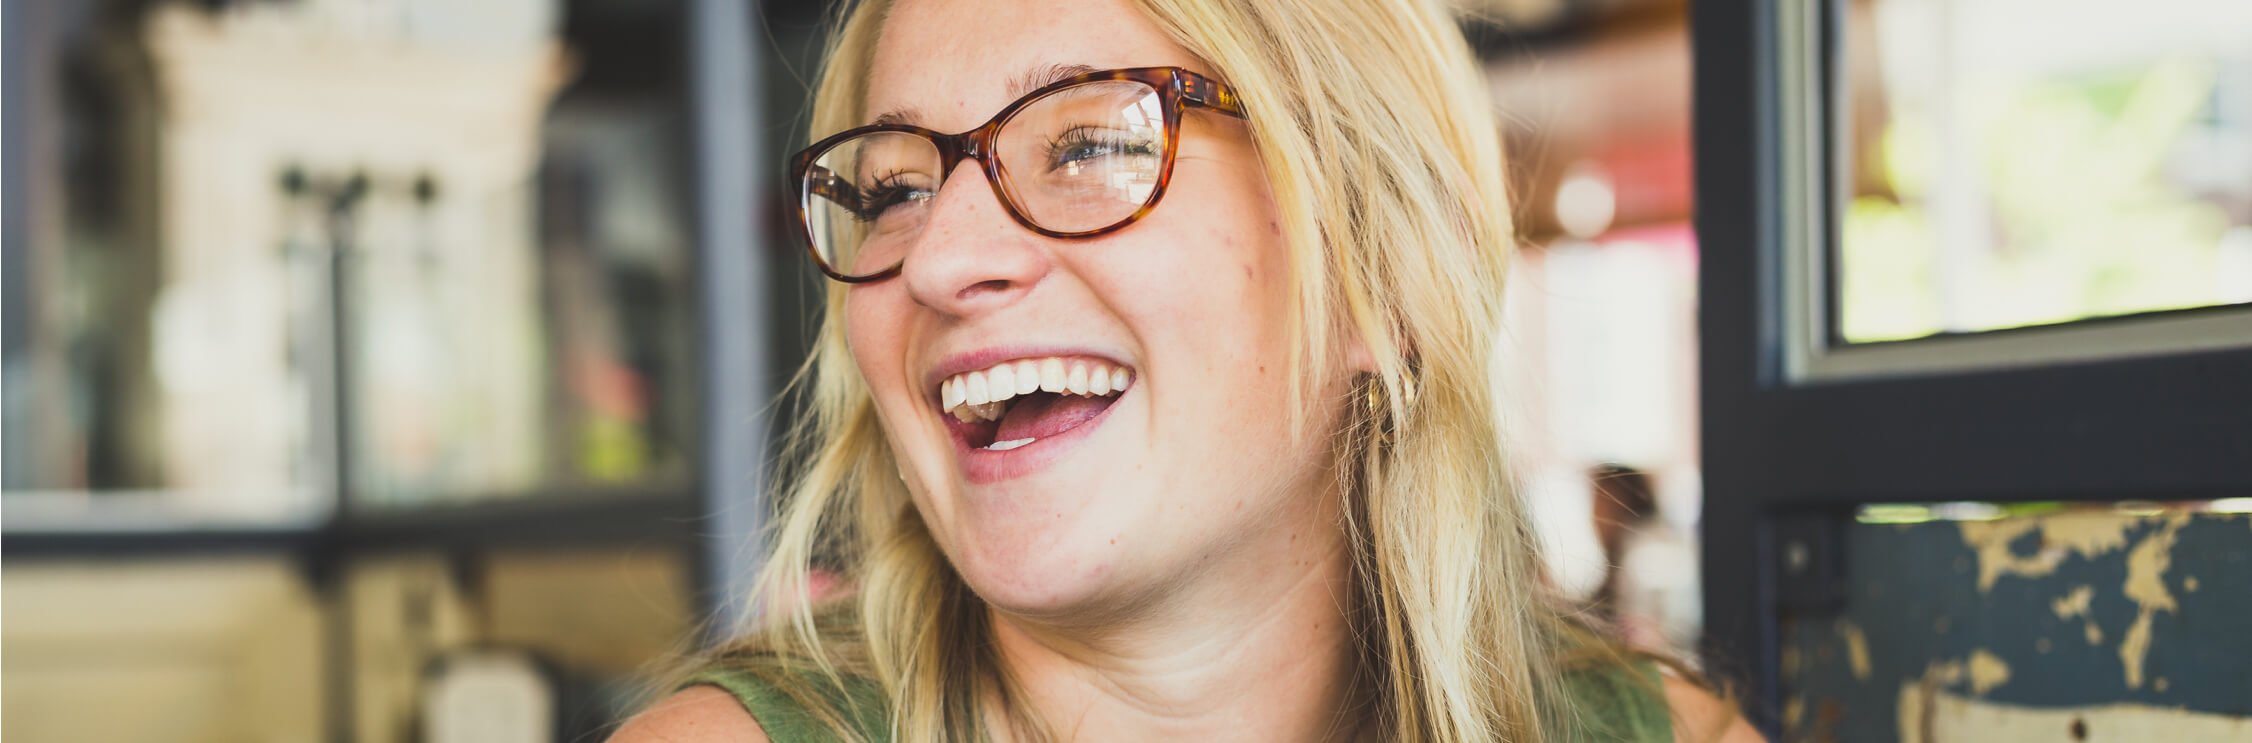 Head and shoulders of smiling woman with long blonde hair wearing a green top and tortoiseshell glasses.